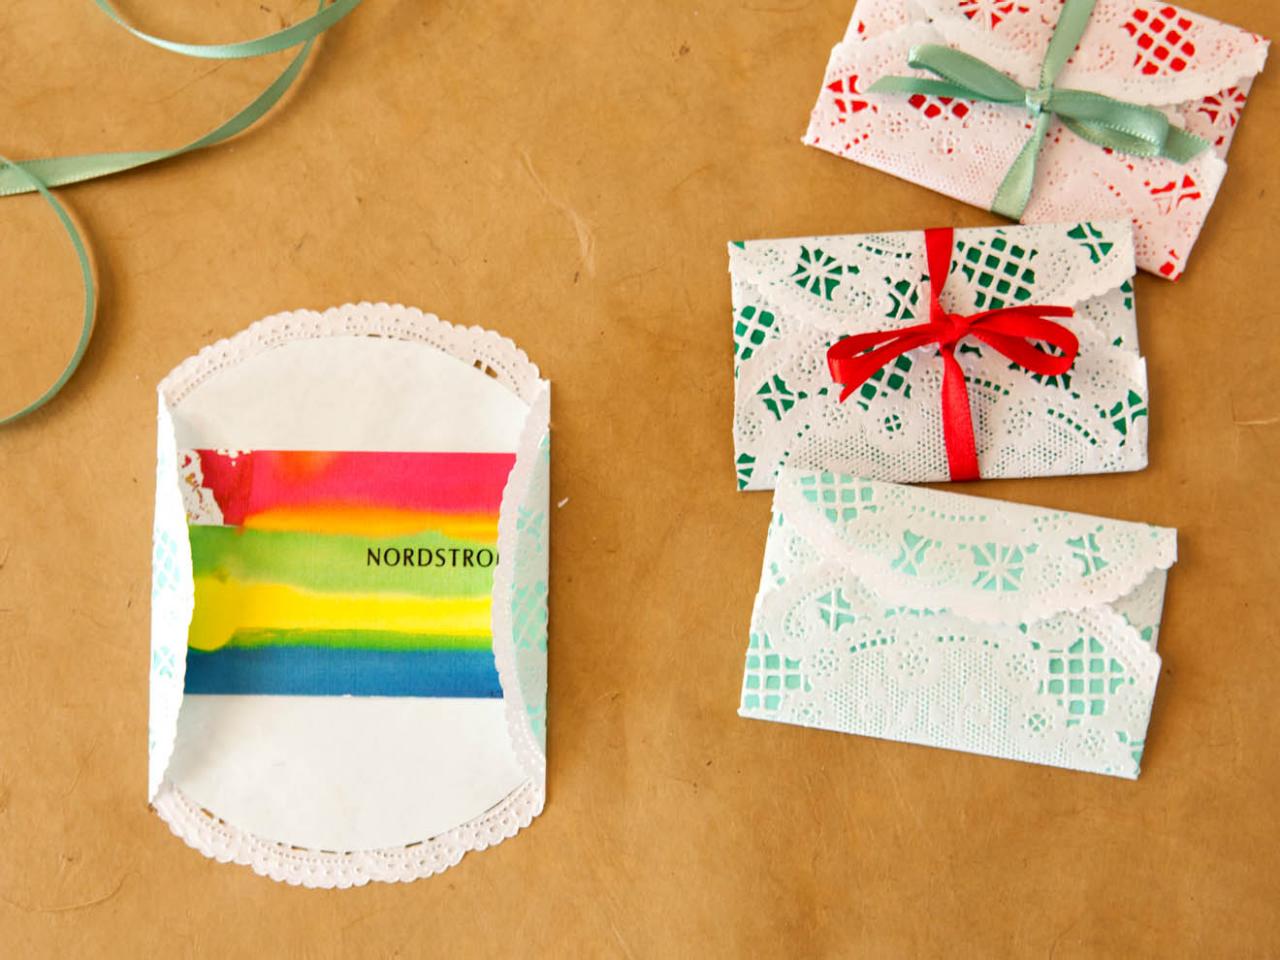 How to wrap a gift